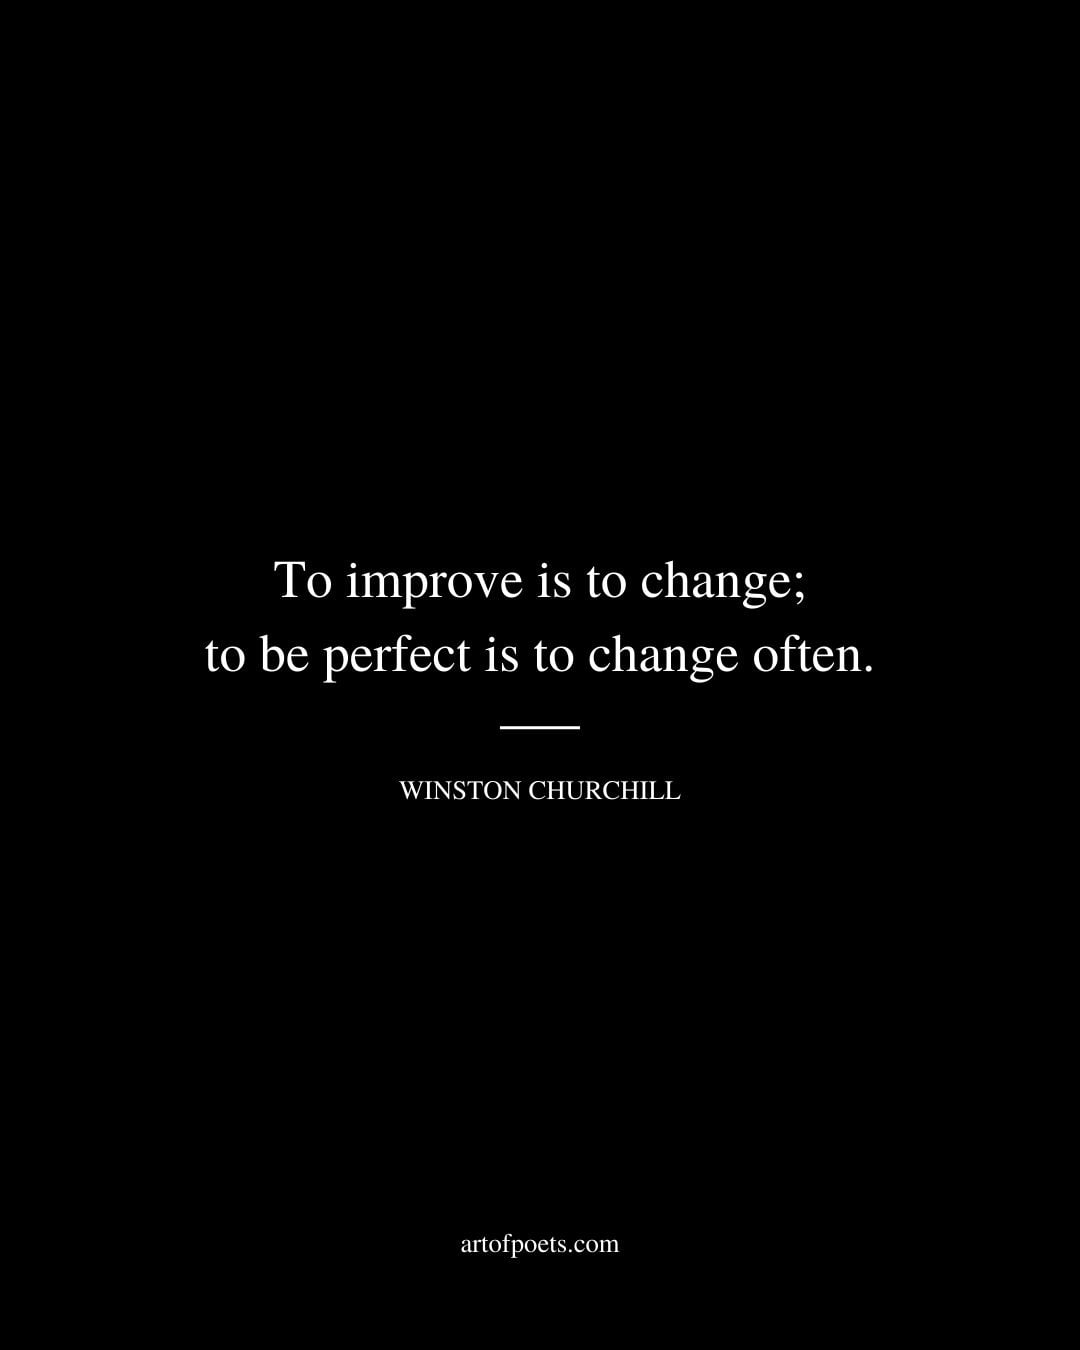 To improve is to change to be perfect is to change often